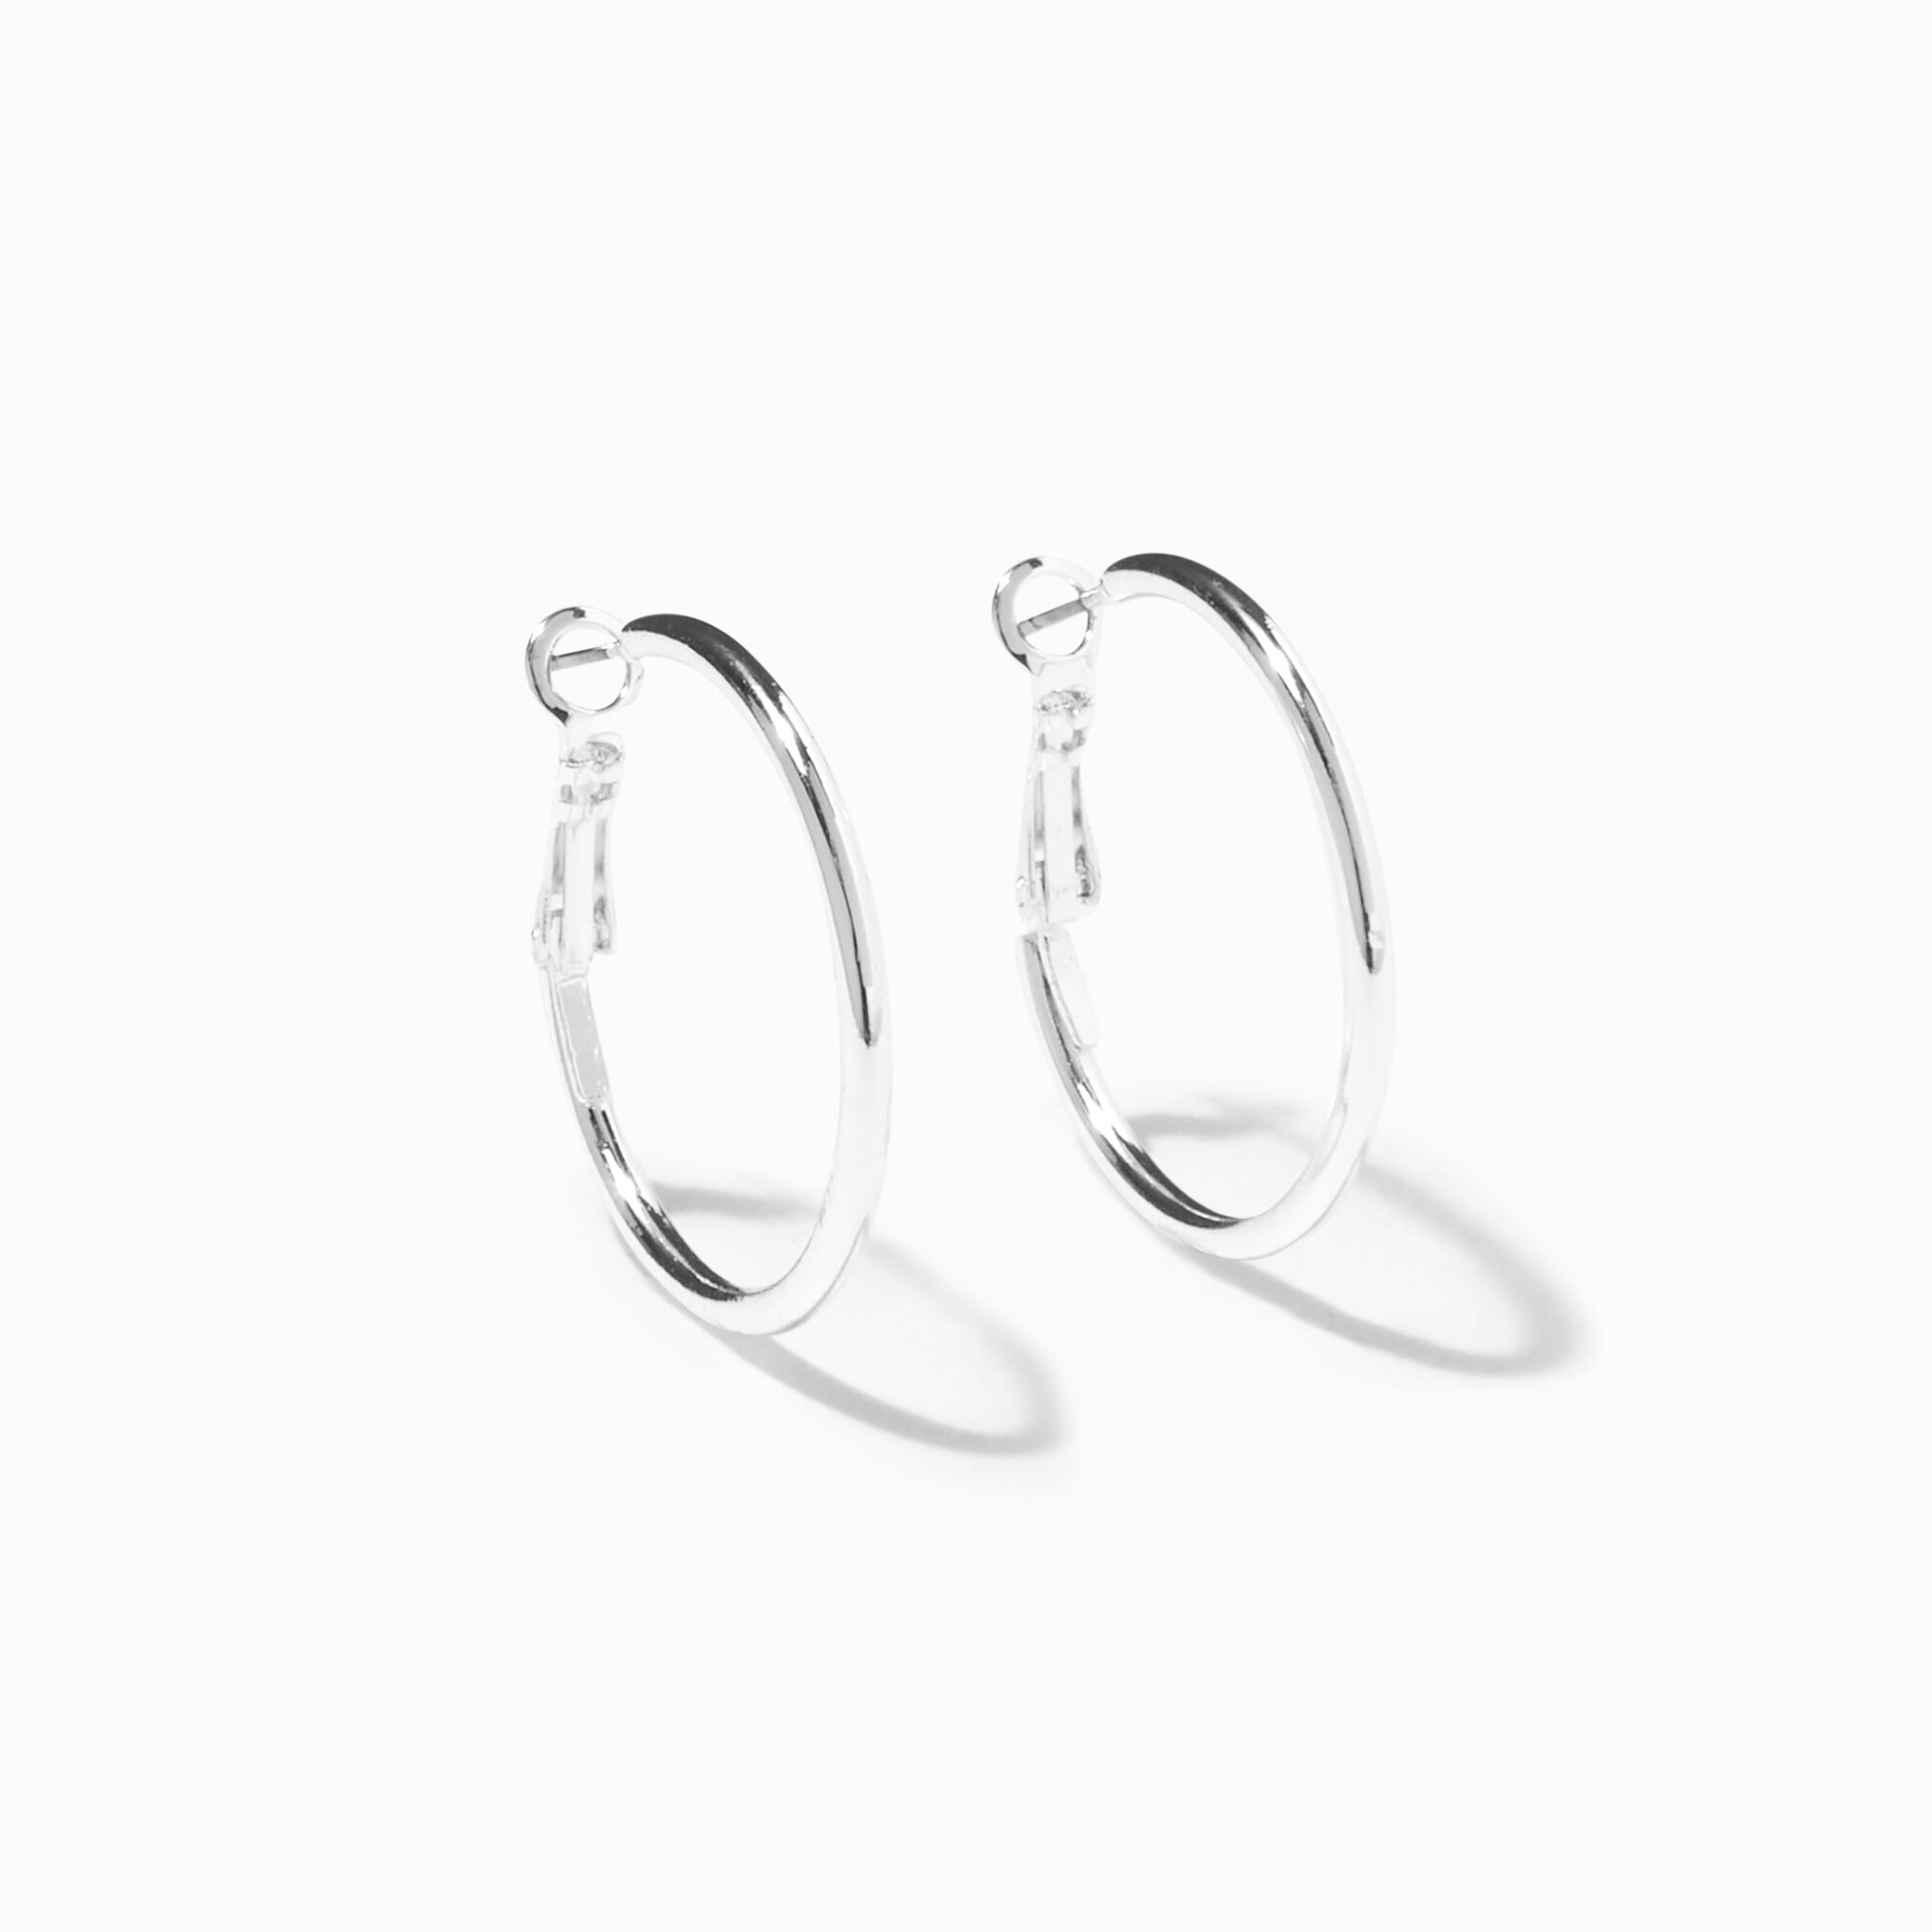 View Claires Tone 30MM Hoop Earrings Silver information